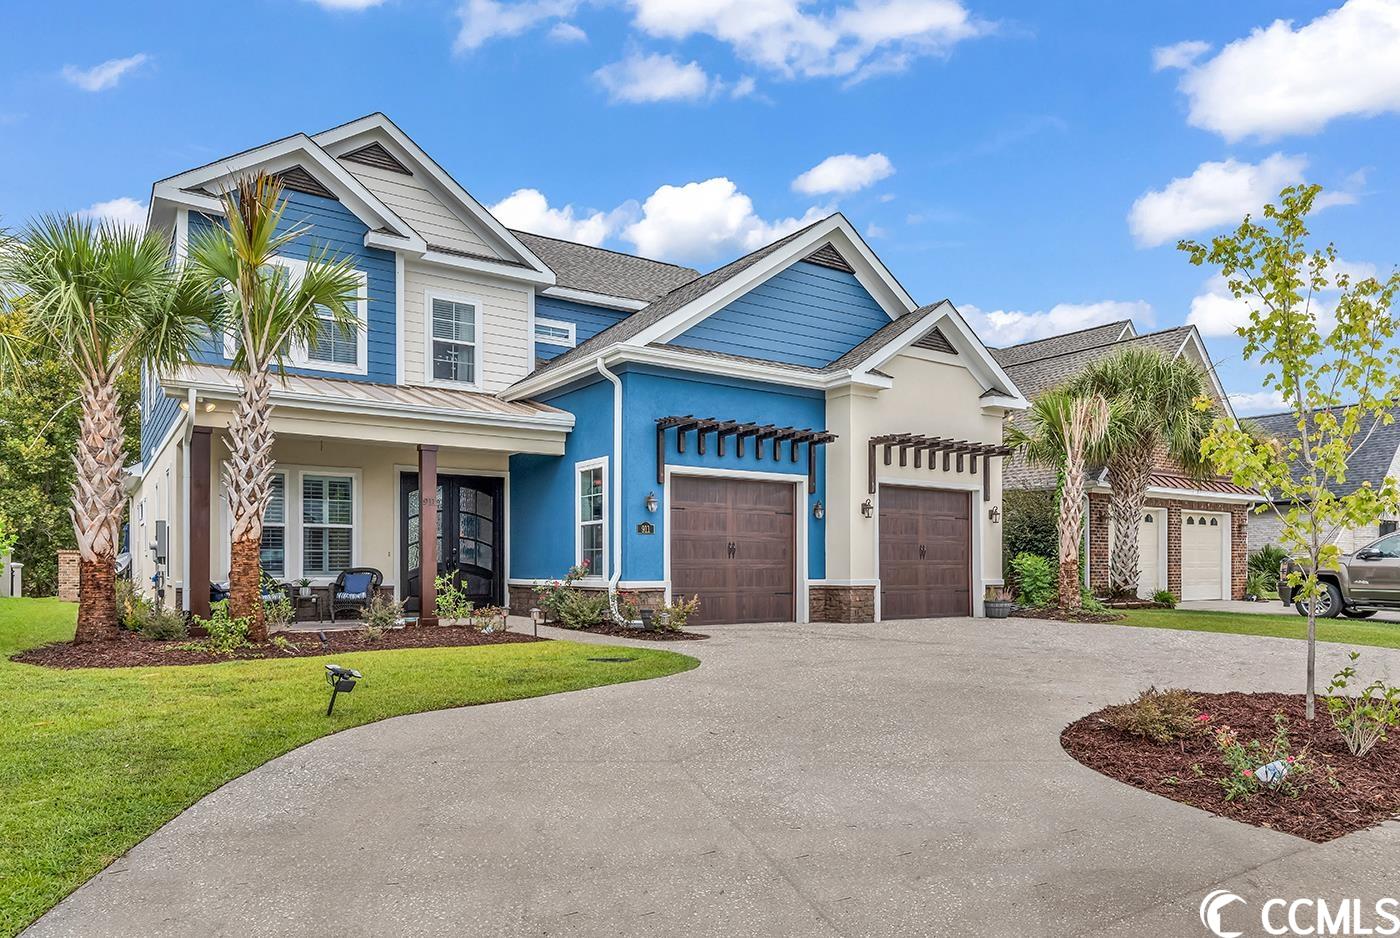 welcome to this exquisite home located in a prestigious gated neighborhood, nestled within the serene beauty of an intercoastal waterway community. enjoy summers on your boat with private community storage and boat ramp to the intercoastal waterway. as you enter this captivating residence, you are greeted by a grand entrance that showcases the soaring, super-tall ceilings adorned with elegant wainscoting and crown molding throughout the first floor. indulge in luxury living with an array of enticing features that define the epitome of comfort and style. the heart of the home boasts a chefs dream kitchen with sleek quartz countertops, complemented by double ovens and a gas stove and a vast walk-in pantry and an additional pantry, ensuring ample space for storage that makes culinary endeavors a pleasure. this home caters to both relaxation and productivity, featuring a main bedroom suite on the first floor for ultimate convenience, along with a versatile office space. the main bedroom opens to the pool area through a sliding glass door, offering a private retreat. seamlessly connecting indoor and outdoor living, the master bedroom also offers access to a screened porch in the tranquil backyard. entertaining is a breeze in the backyard oasis, complete with an inground pool featuring a soothing hot tub and a mesmerizing waterfall wall. imagine hosting gatherings under the enchanting outdoor pergola, which houses a fully equipped kitchen, perfect for grilling and dining al fresco. upstairs, discover three generously sized bedrooms, each thoughtfully designed with custom closets to maximize storage space. an additional non-conforming bedroom provides flexibility, while a loft space offers endless possibilities for recreation or relaxation. additionally, a hidden gem awaits – a bedroom with a secret entrance through a bookcase, adding an element of playful charm. practicality meets elegance with features like custom closets enhancing organization and functionality, a two-car garage, a full laundry room, a tankless water heater utilizing gas, and so much more! this home harmoniously blends luxury and practicality, creating a haven that perfectly balances comfort, style, and functionality in a captivating intercoastal waterway setting. seller is offering a rate buy down! see agent to agent remarks for more details.